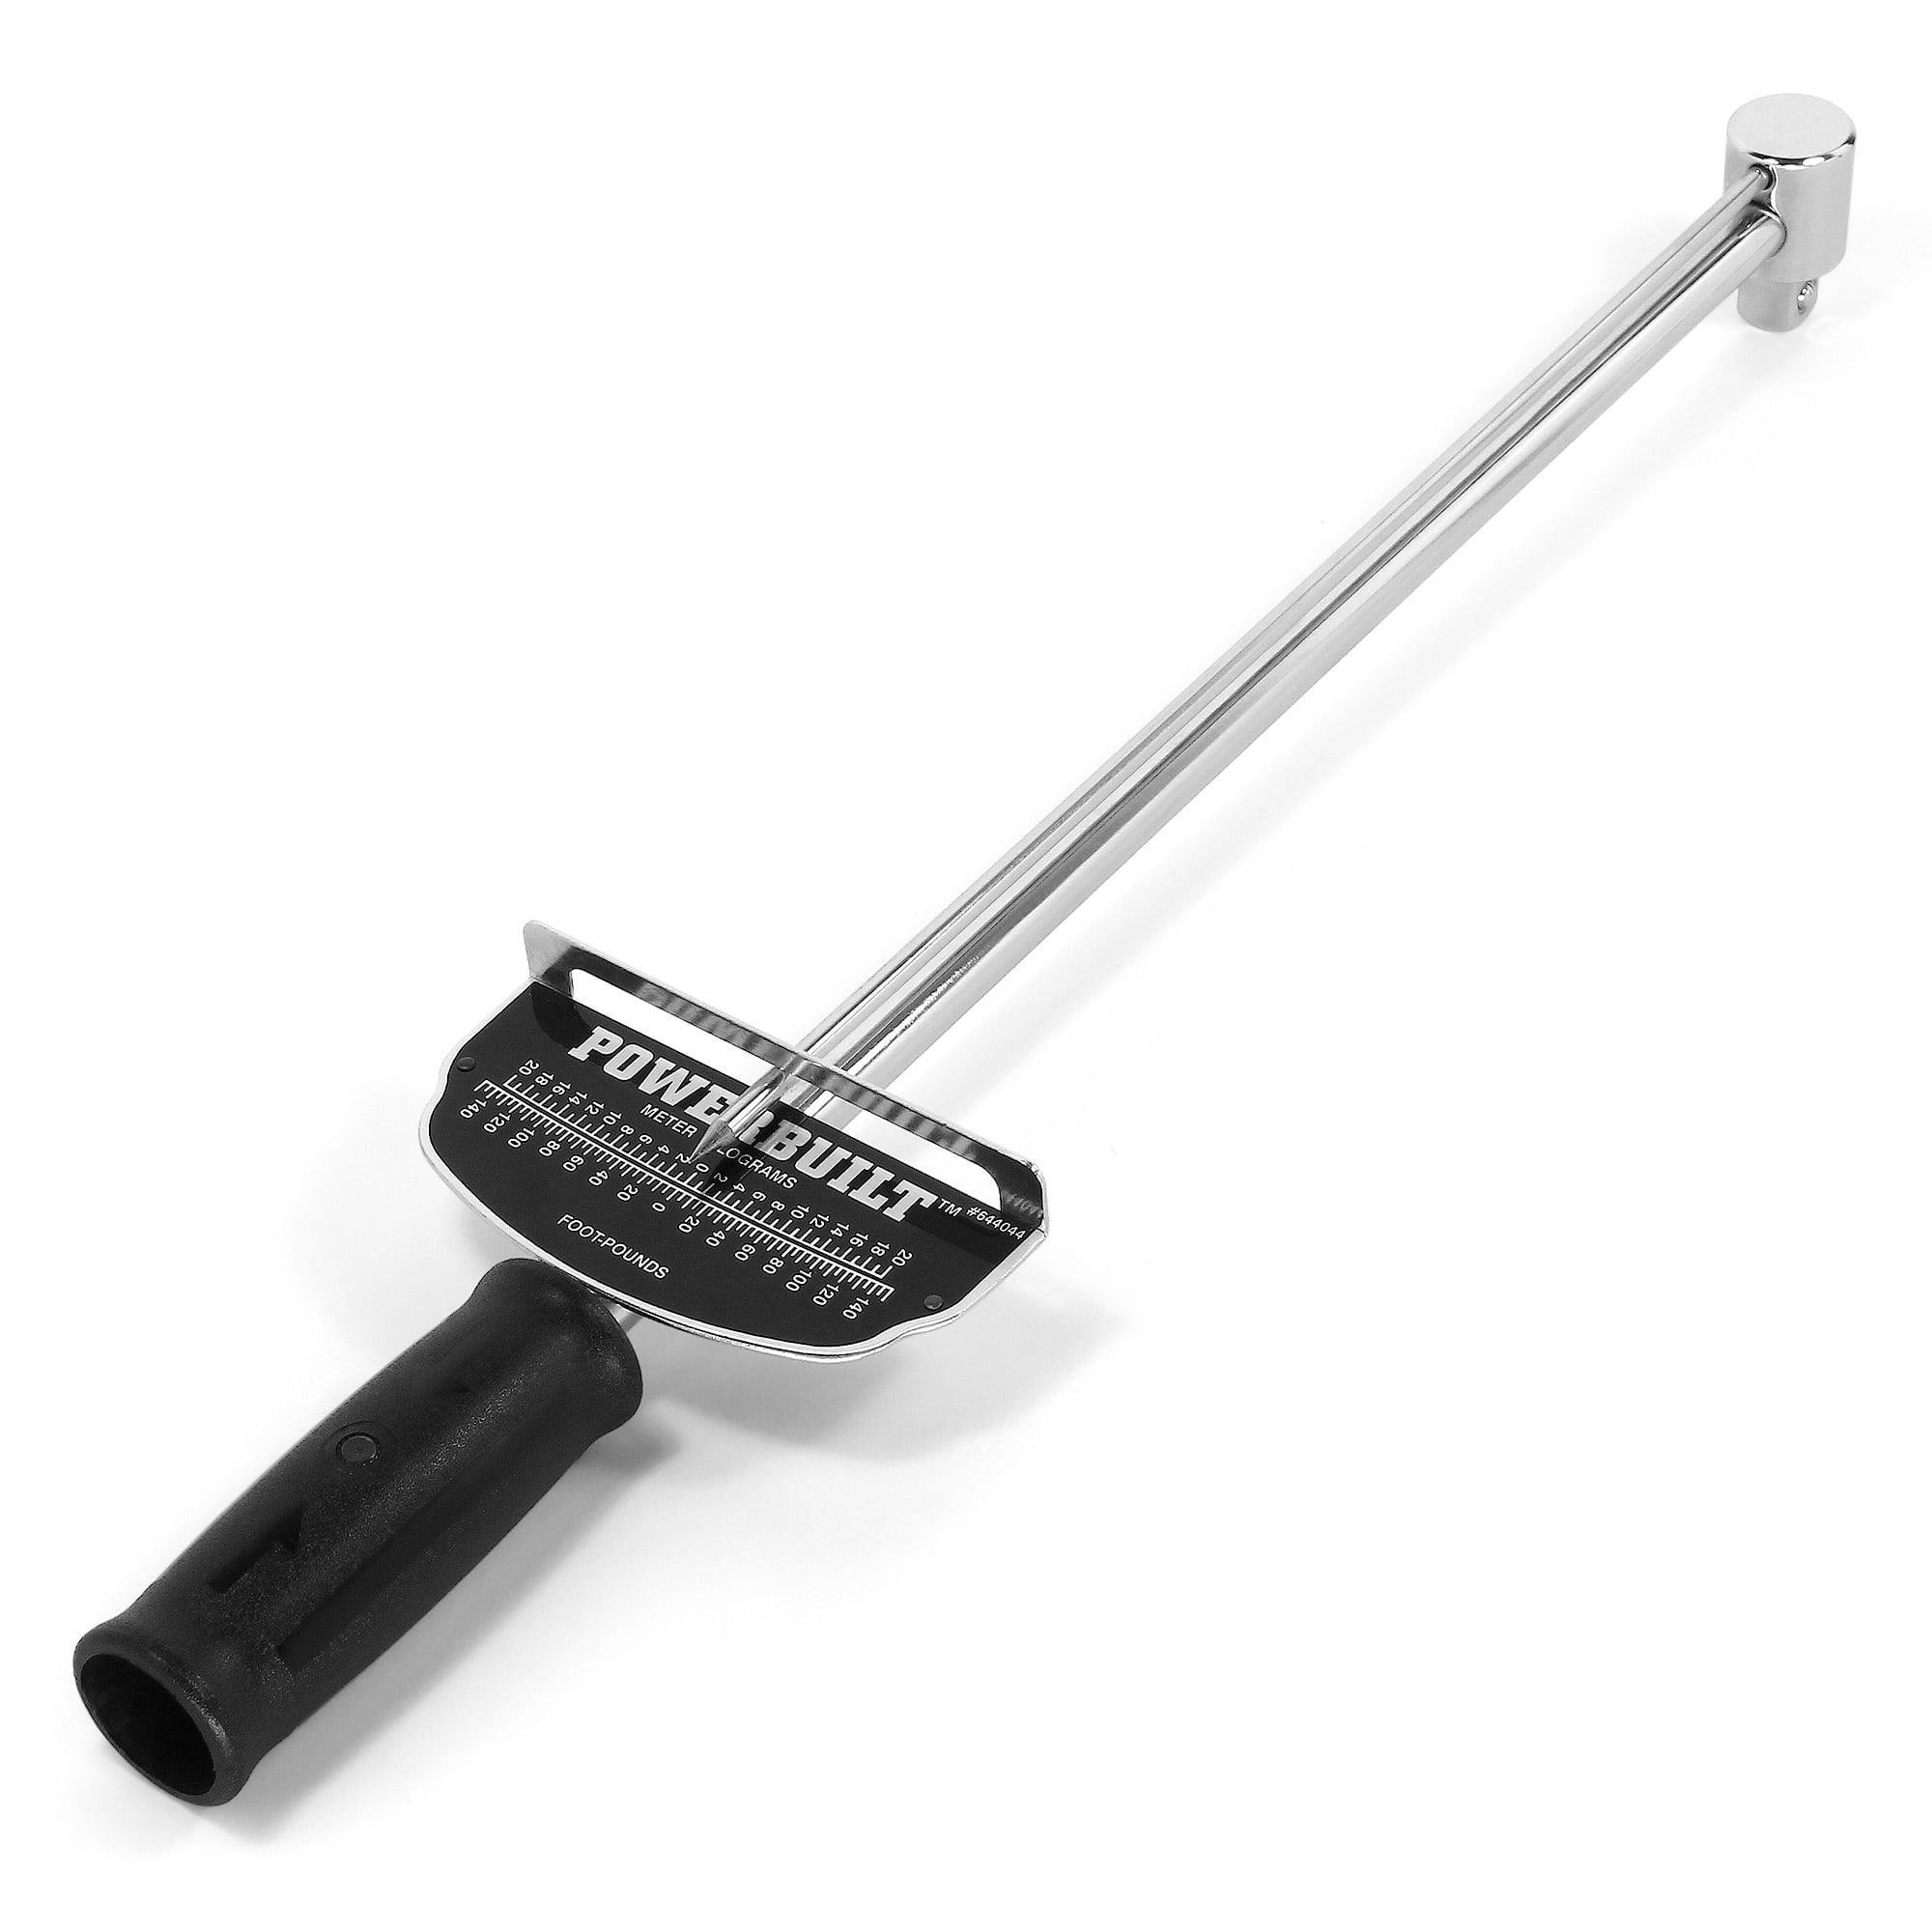 Powerbuilt 644999 1/2-Inch Drive Click Micrometer Torque Wrench 